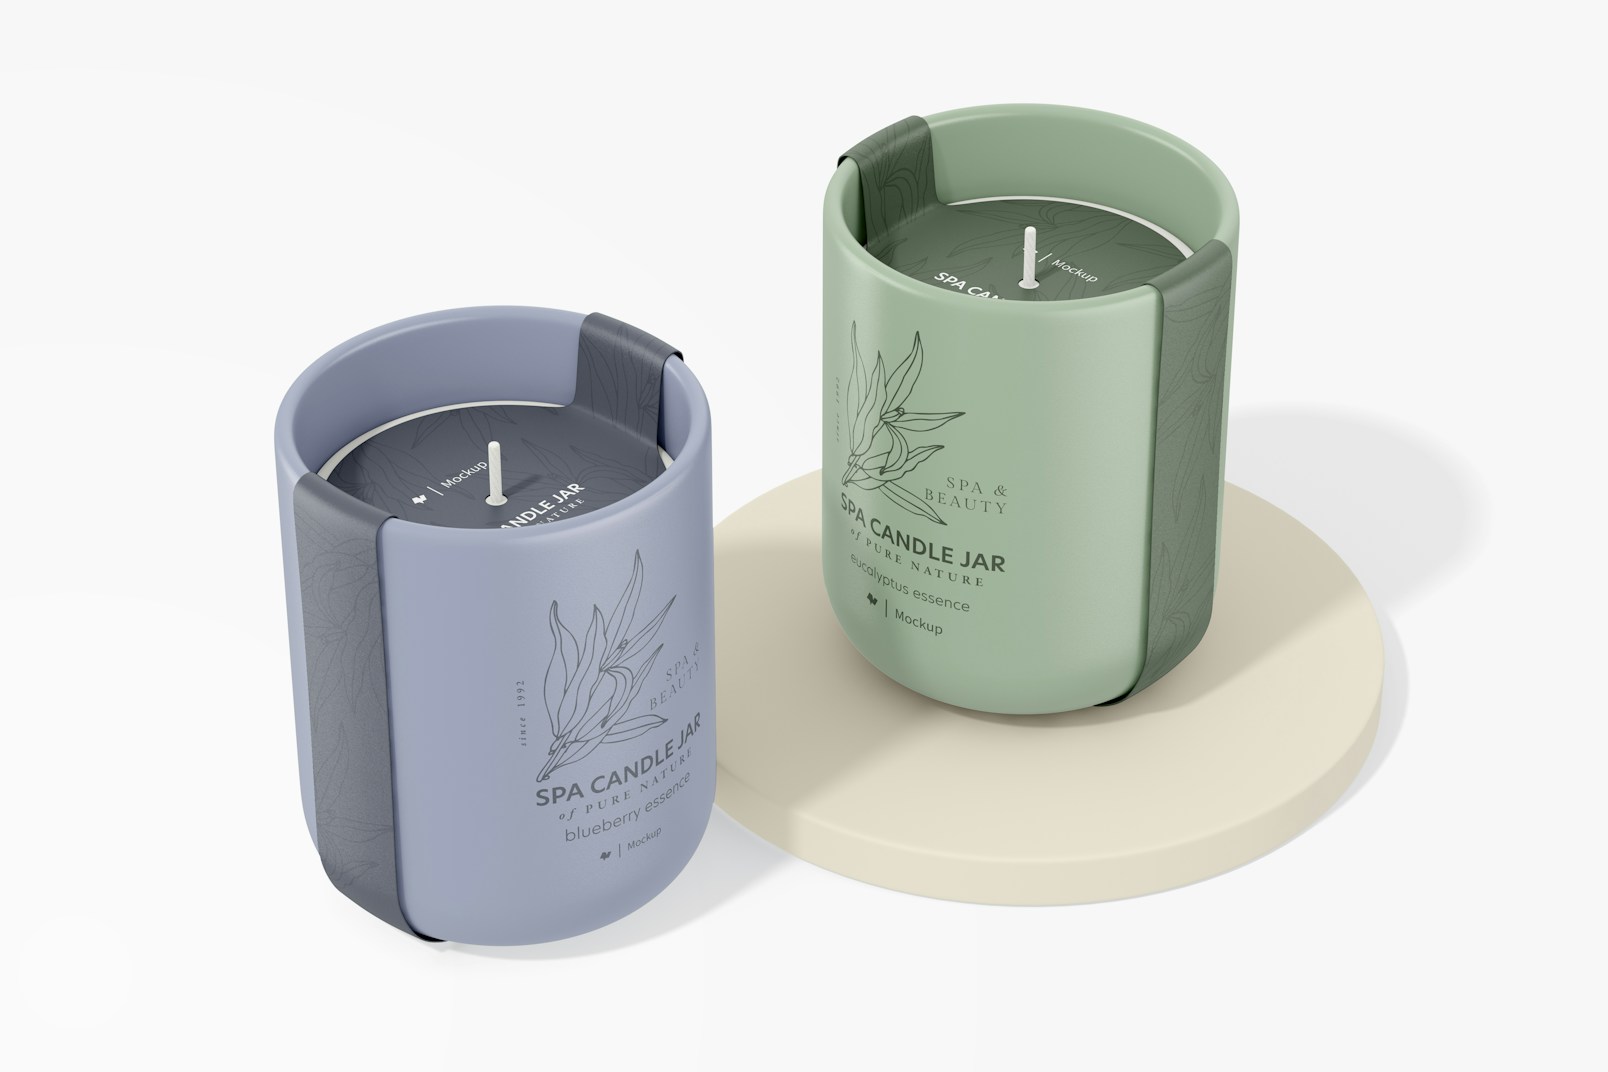 Spa Candle Jar with Label Mockup